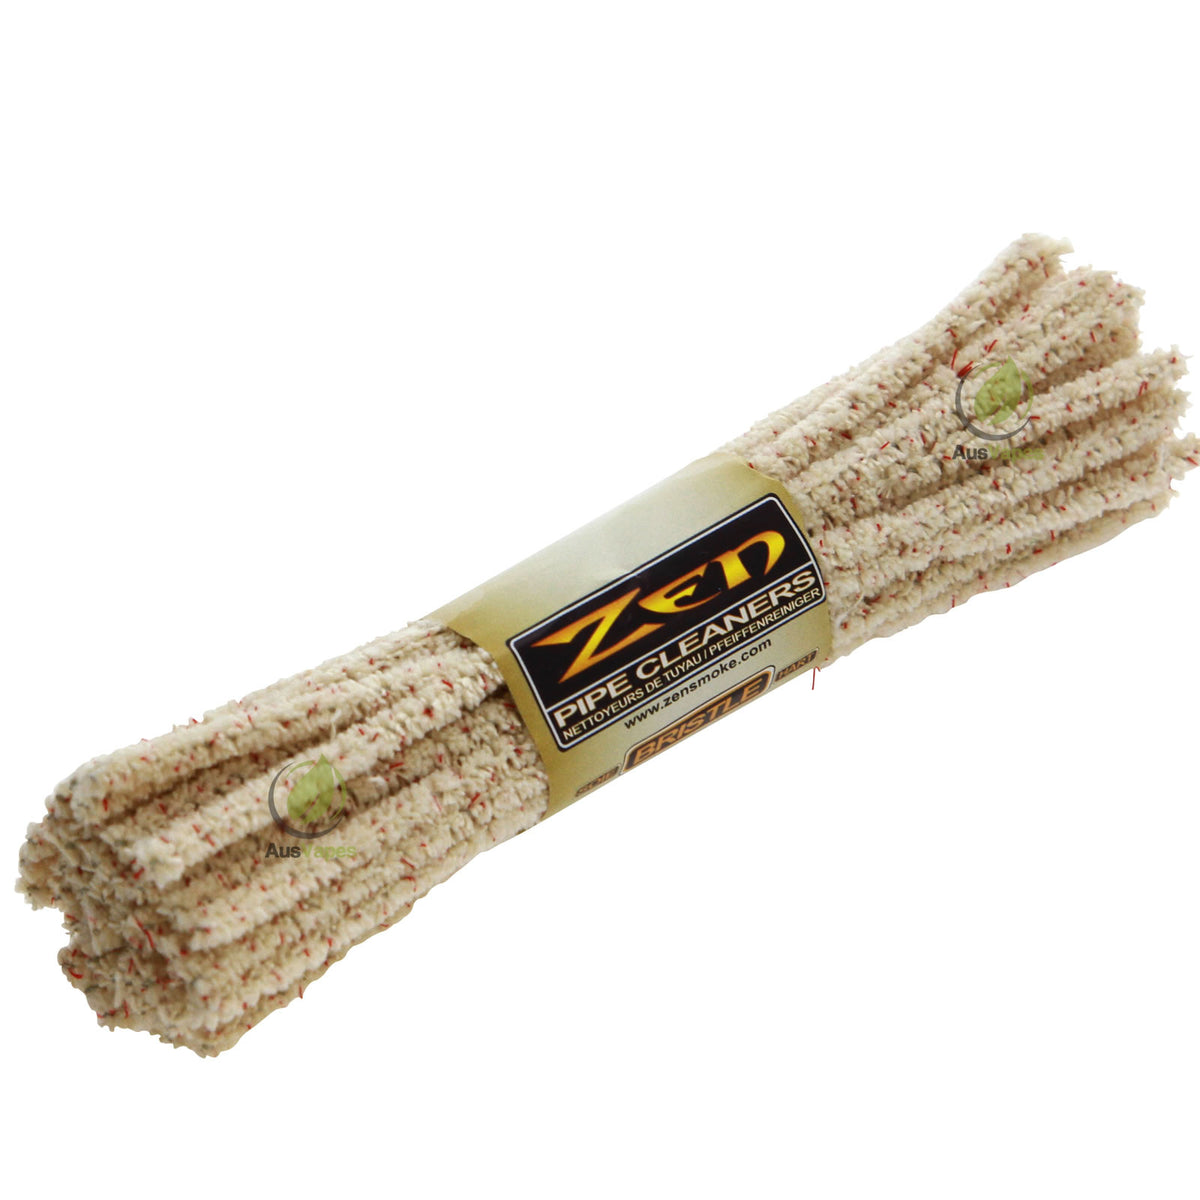 Zen Hard Bristle Pipe Cleaners - 40 pack